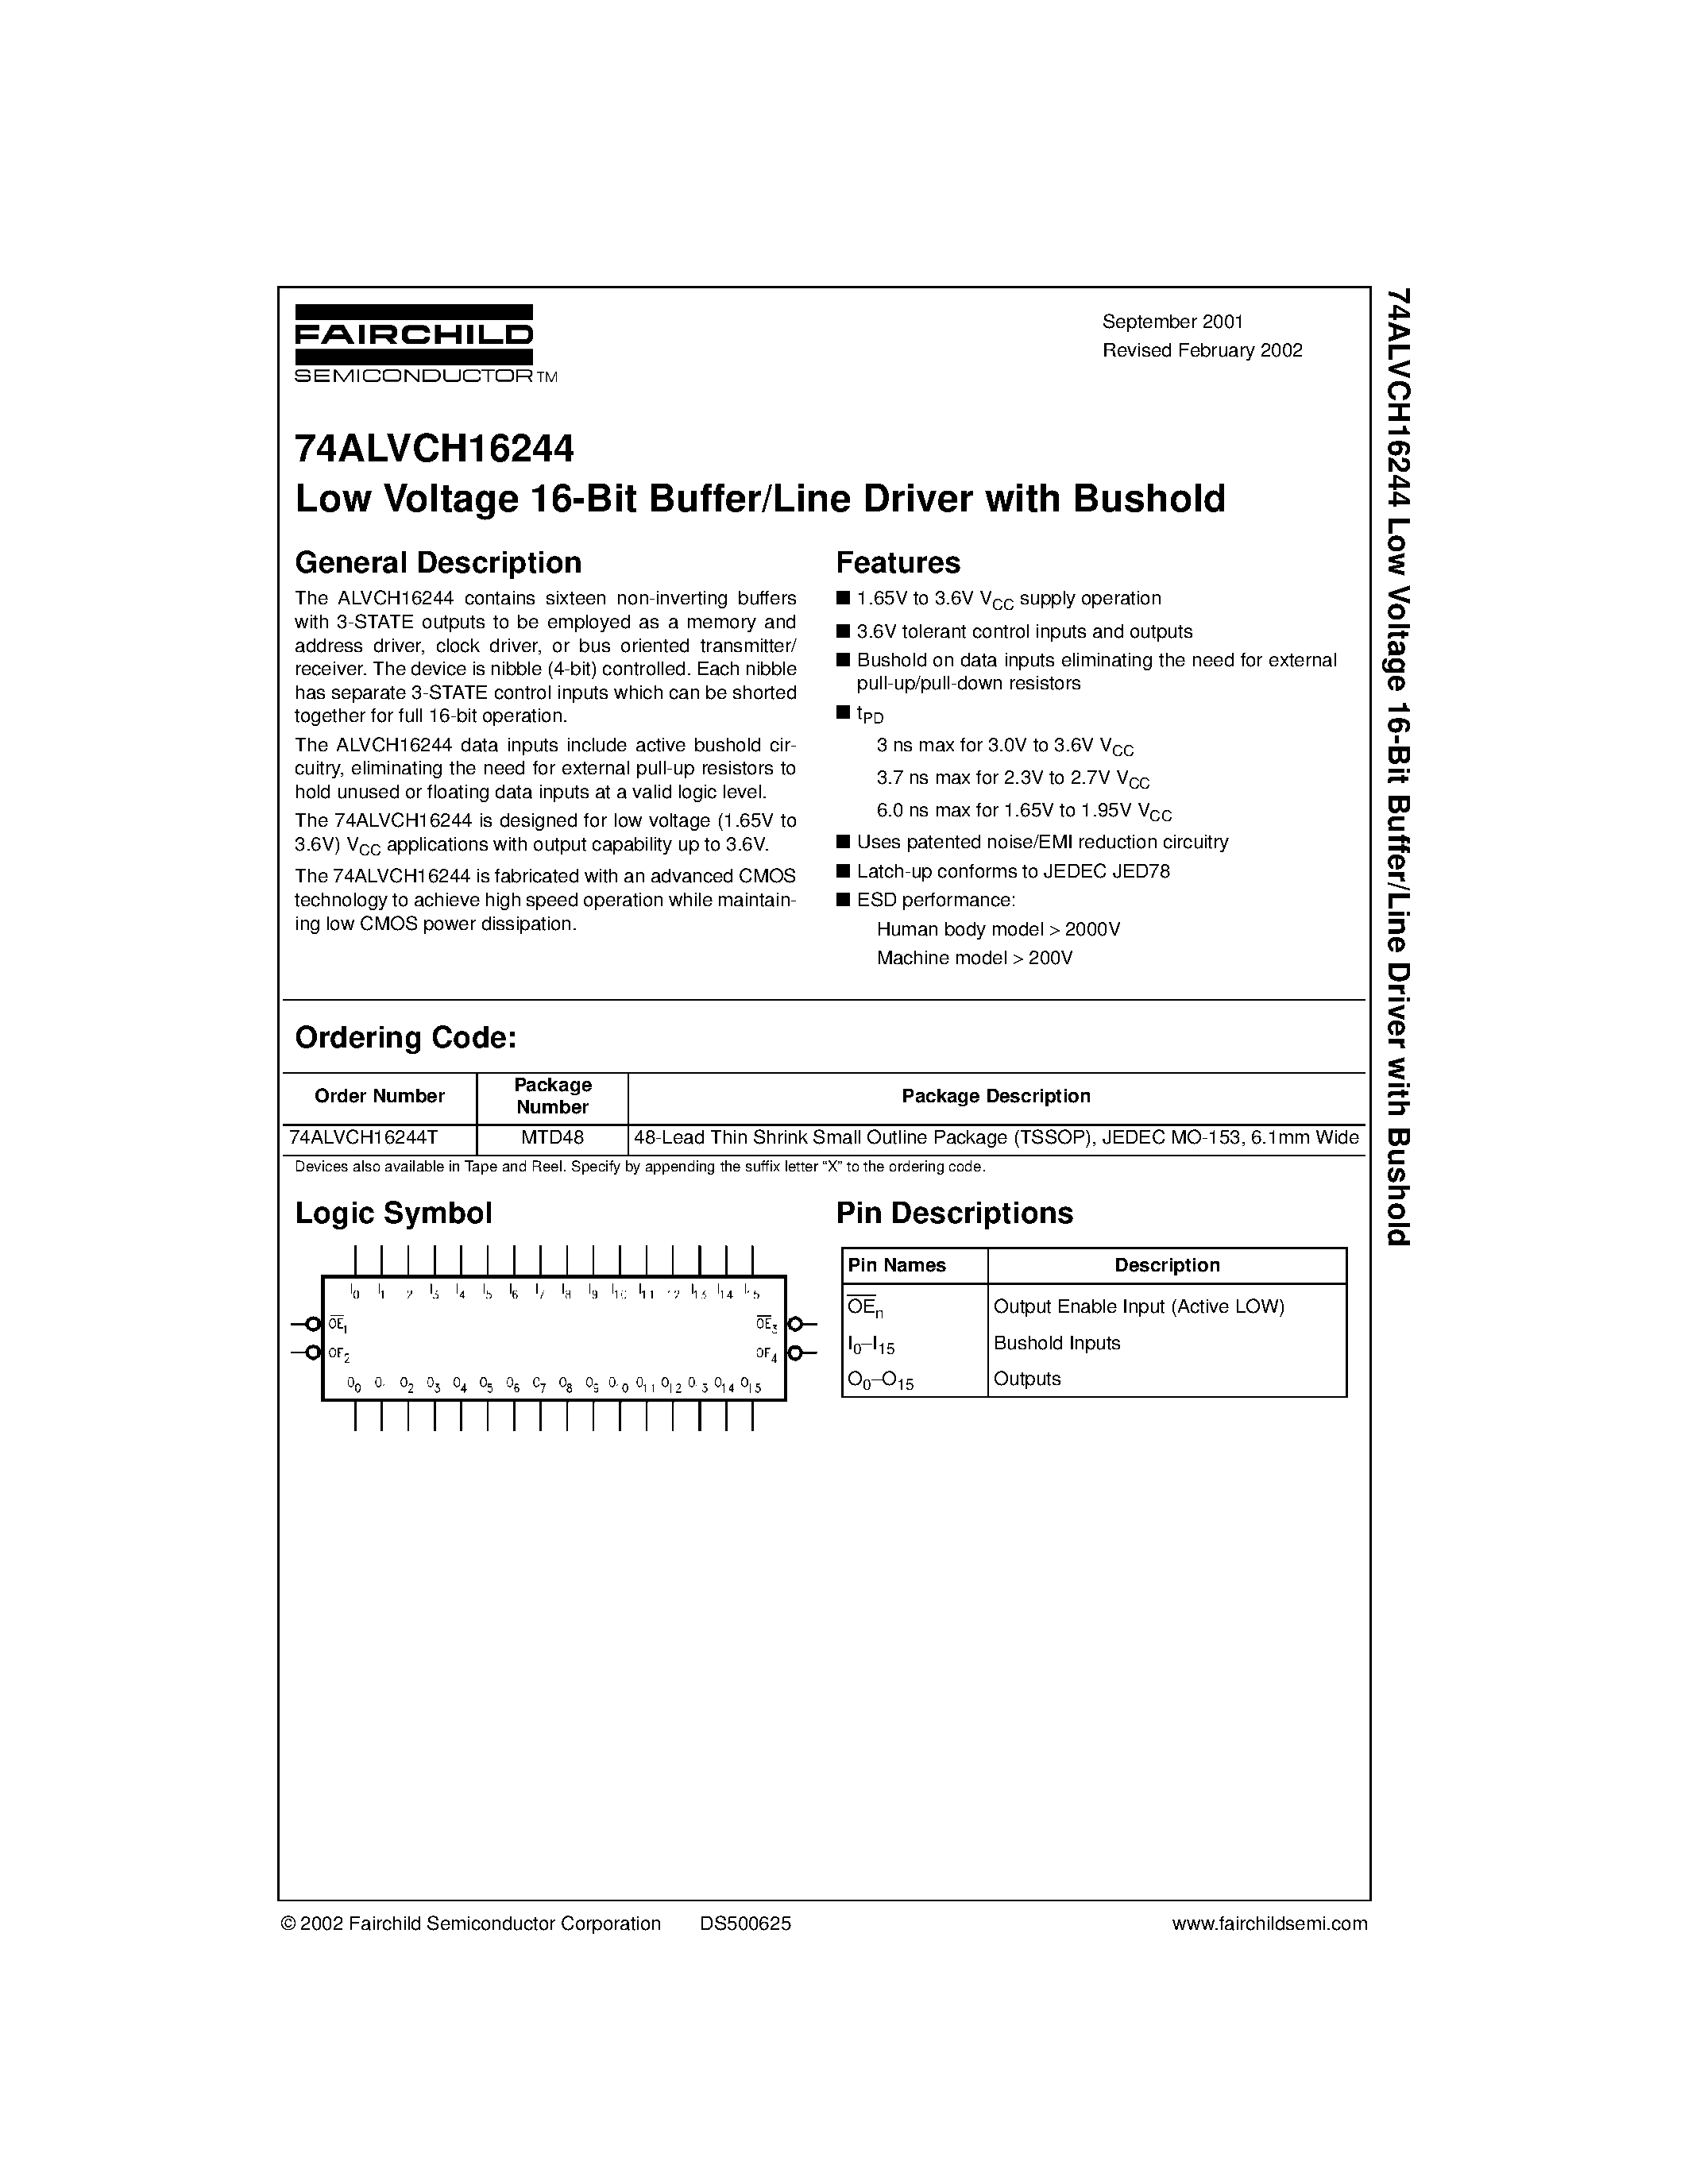 Datasheet 74ALVCH16244 - Low Voltage 16-Bit Buffer/Line Driver with Bushold page 1